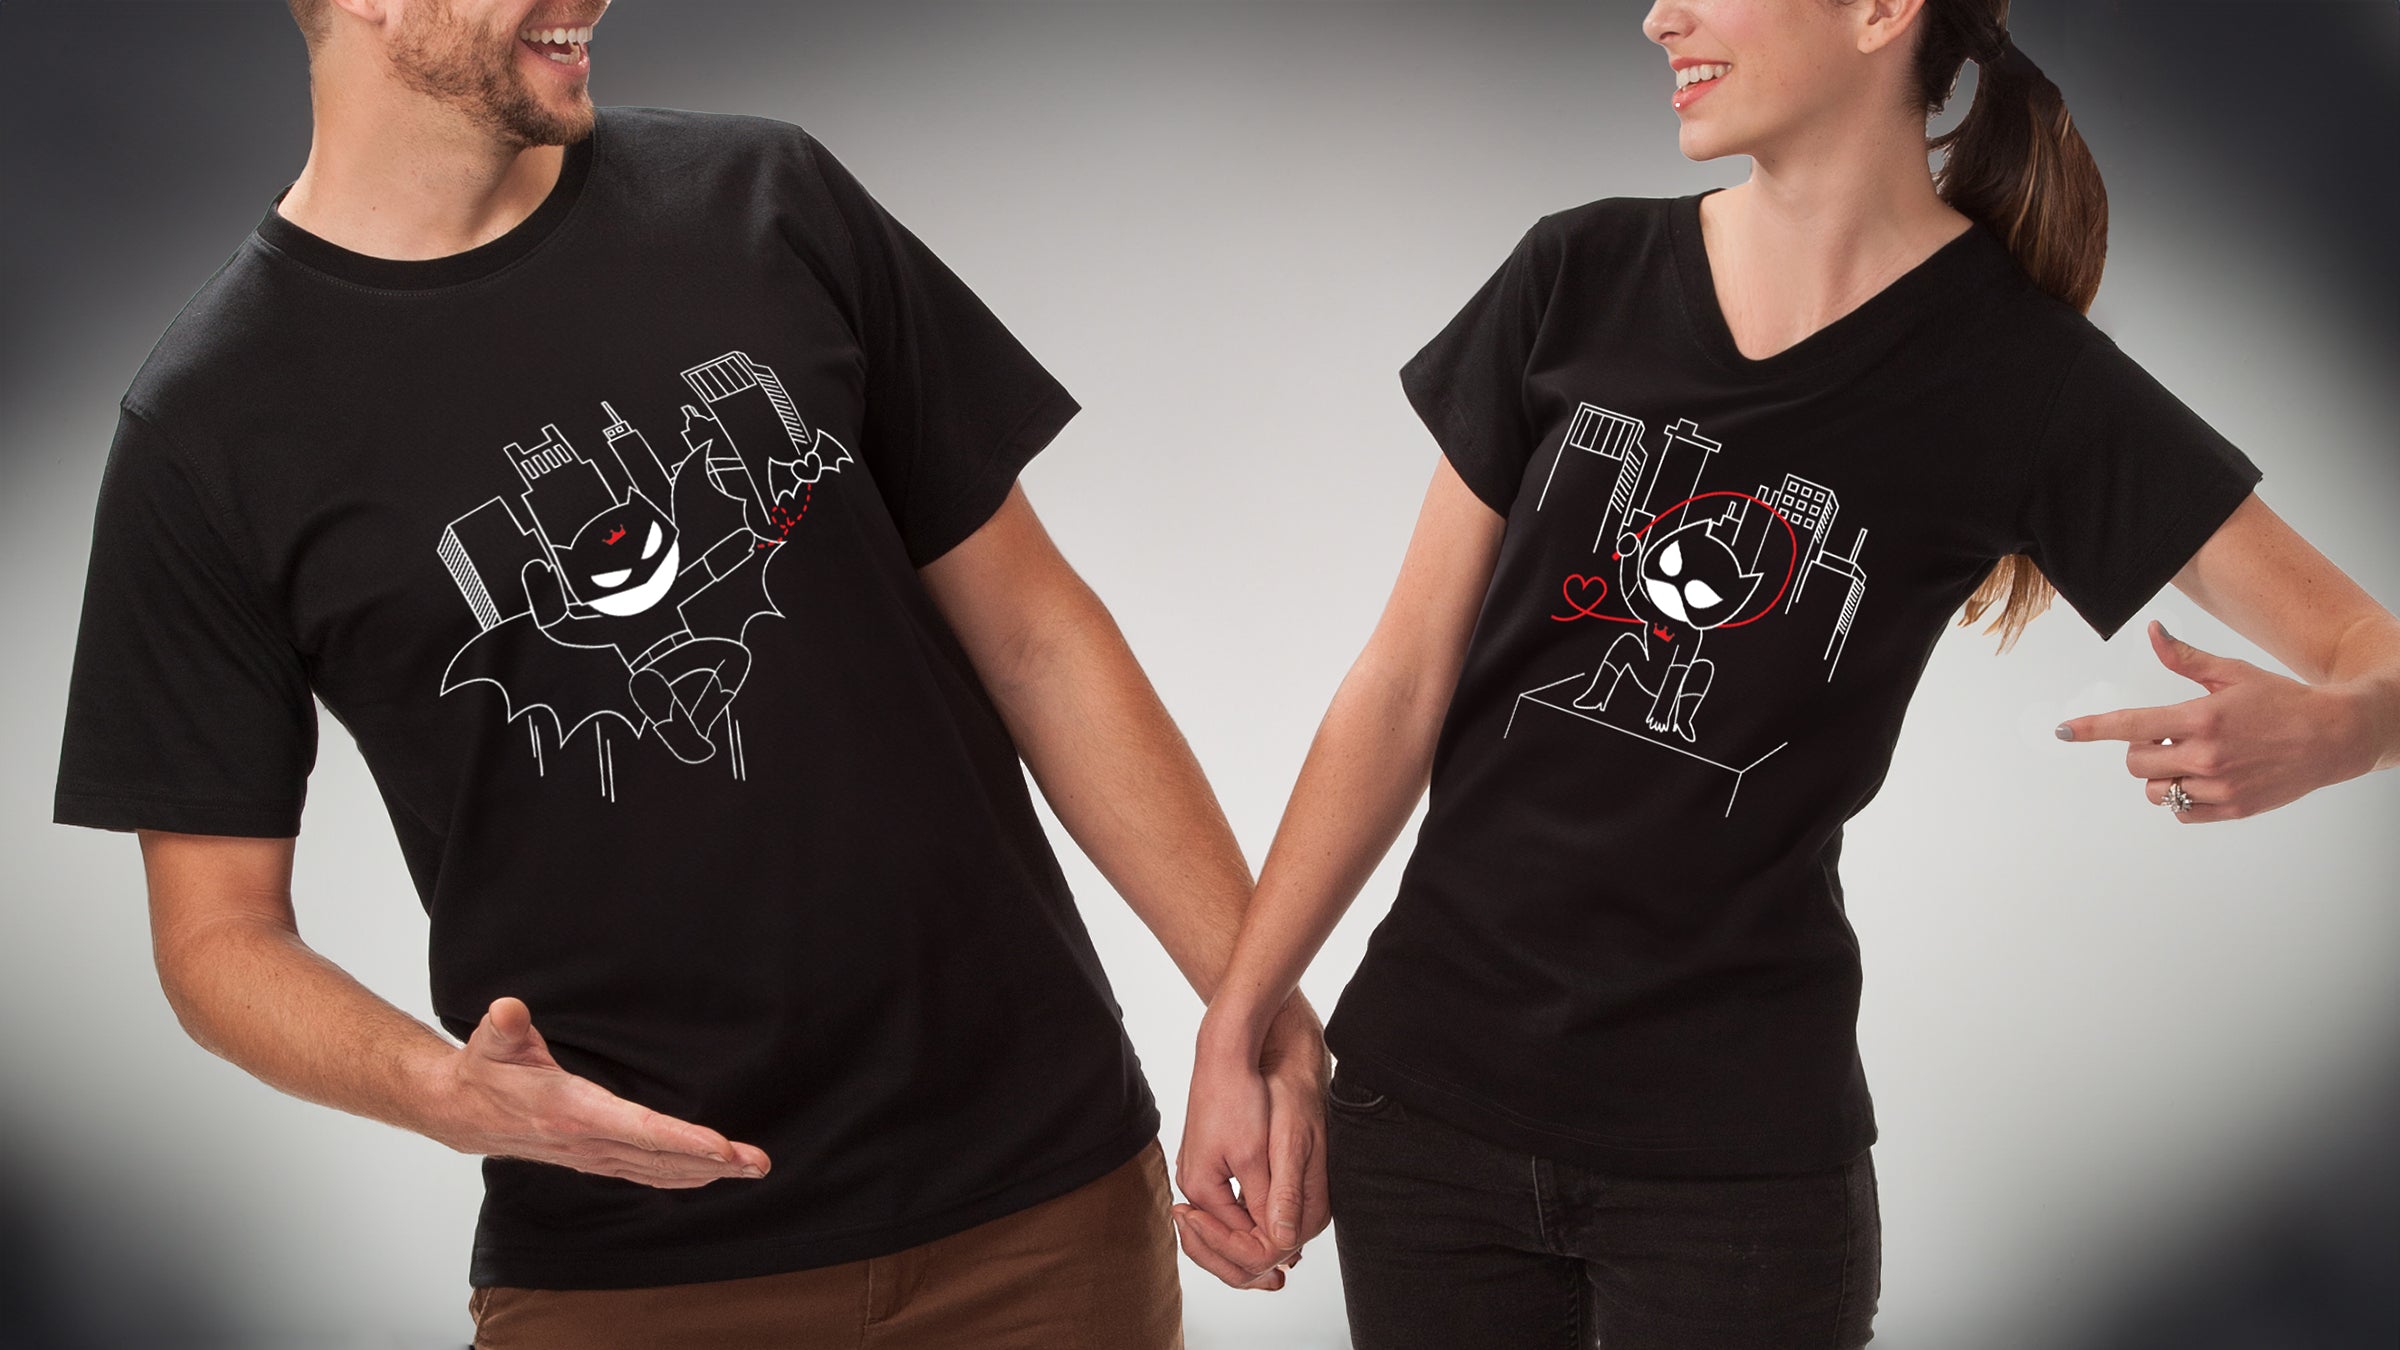 BoldLoft couple shirts featured movie characters, perfect for a movie date